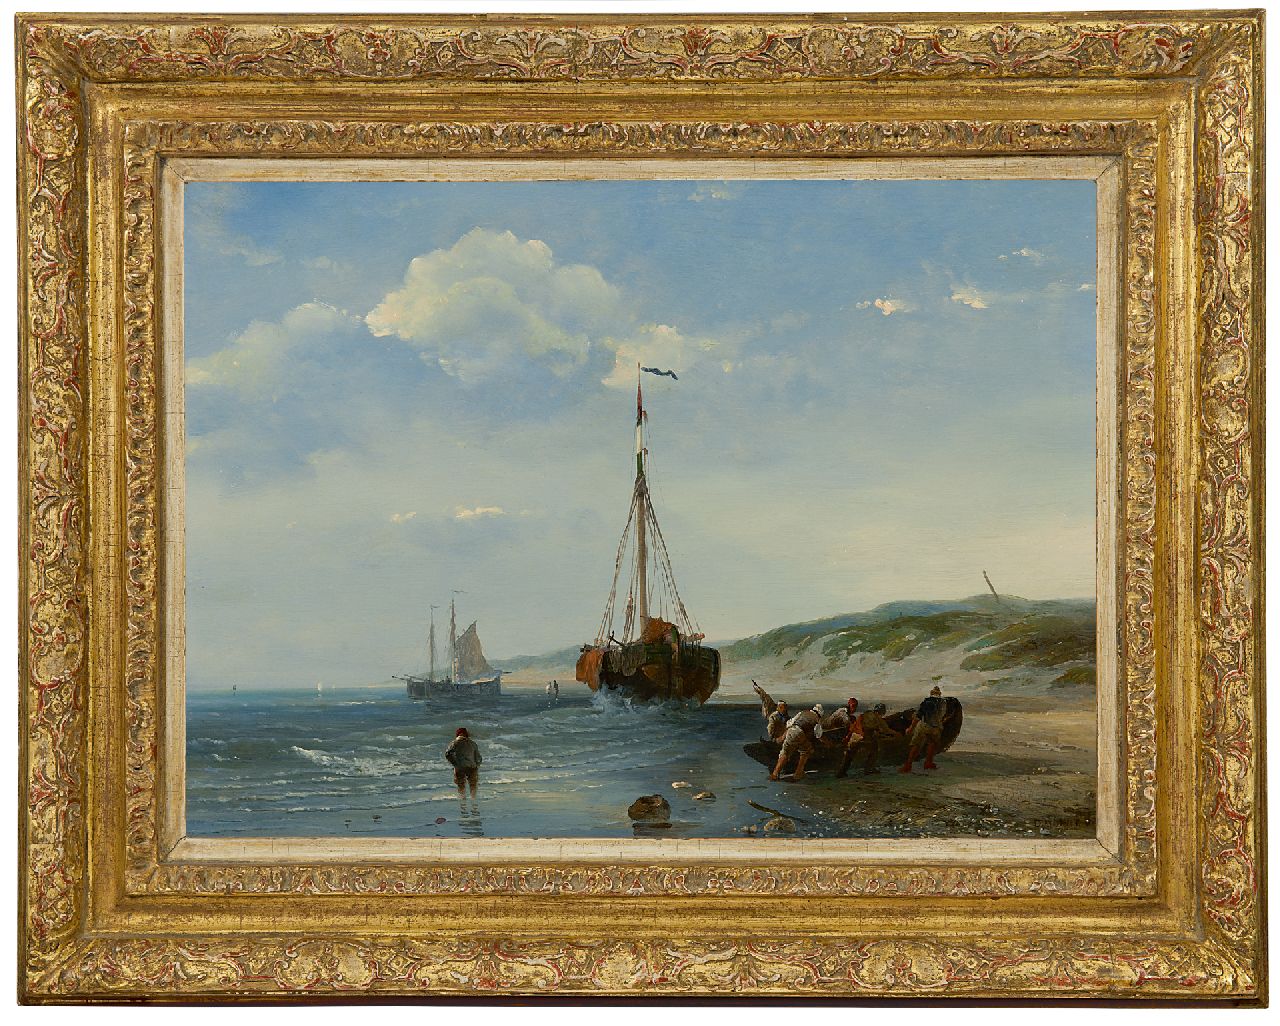 Donny D.  | Desiré Donny | Paintings offered for sale | Fishing boats at low tide, oil on panel 25.4 x 35.2 cm, signed l.r.